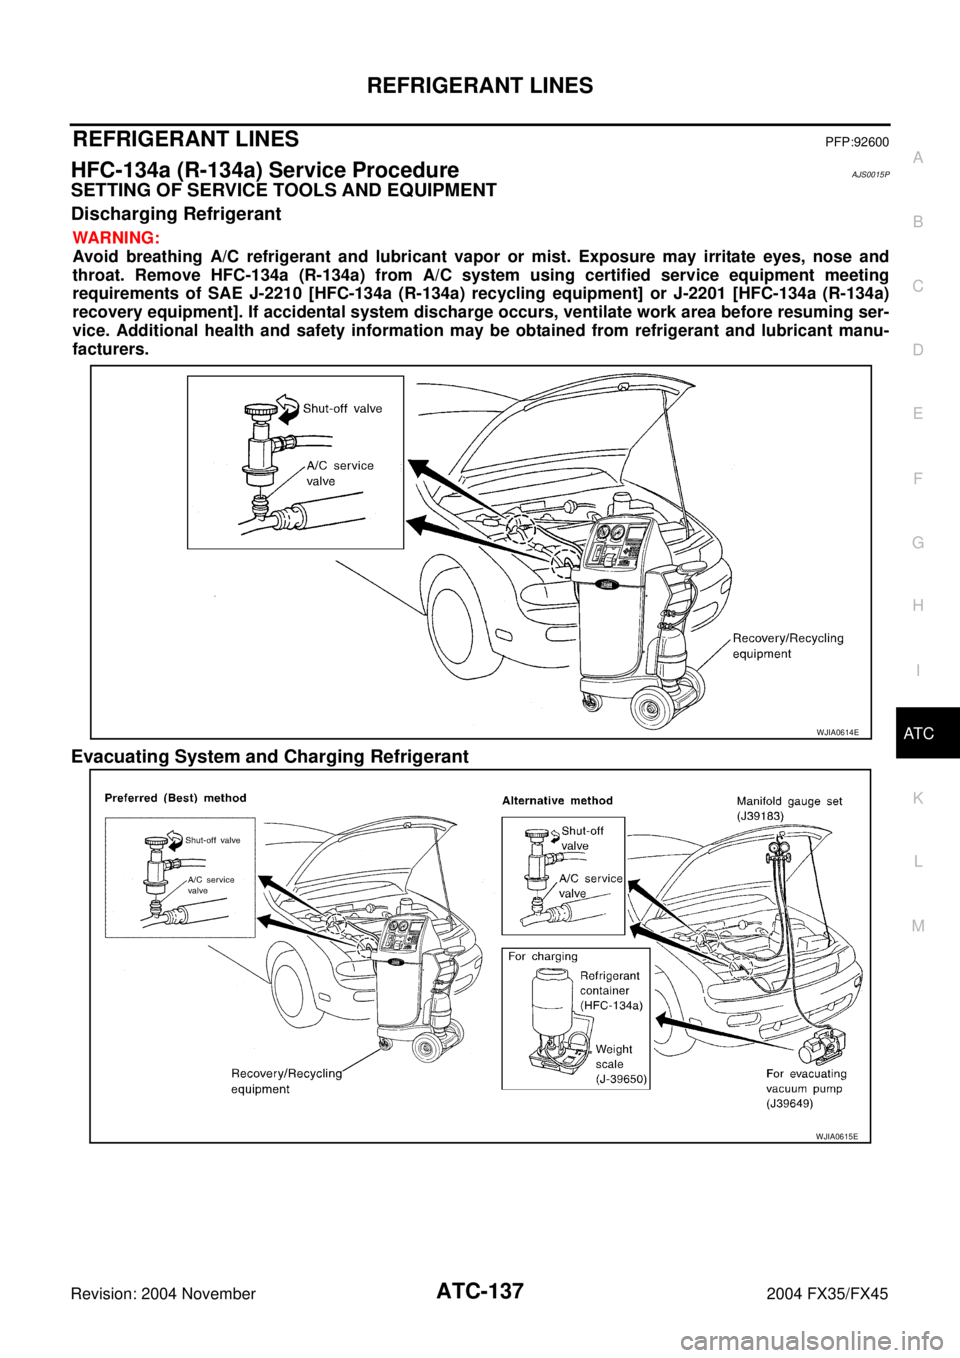 INFINITI FX35 2004  Service Manual REFRIGERANT LINES
ATC-137
C
D
E
F
G
H
I
K
L
MA
B
AT C
Revision: 2004 November 2004 FX35/FX45
REFRIGERANT LINESPFP:92600
HFC-134a (R-134a) Service ProcedureAJS0015P
SETTING OF SERVICE TOOLS AND EQUIPME